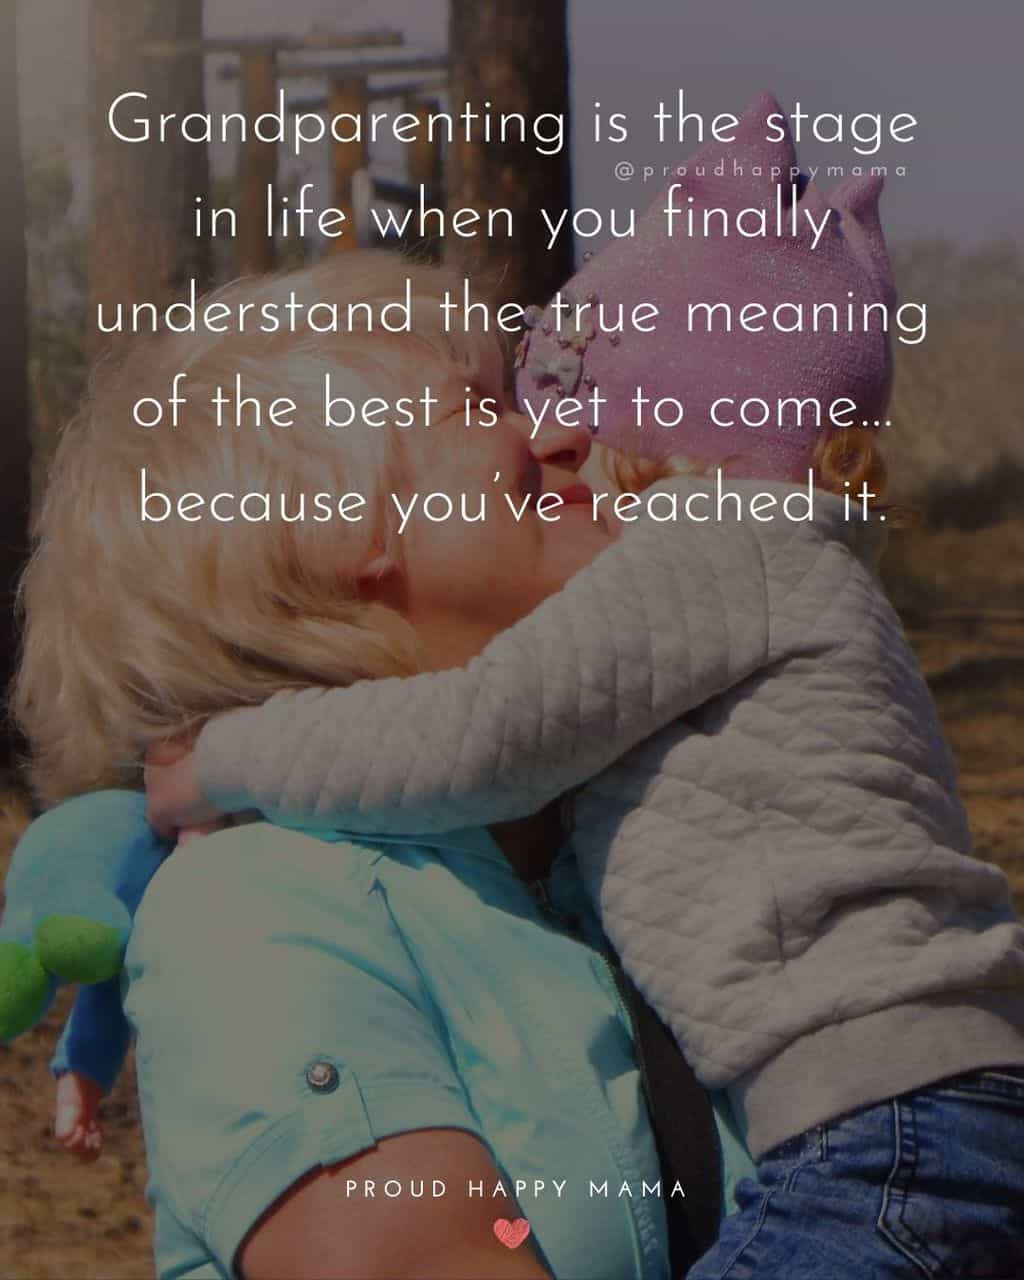 Grandparent Quotes – Grandparenting is the stage in life when you finally understand the true meaning of the best is yet to